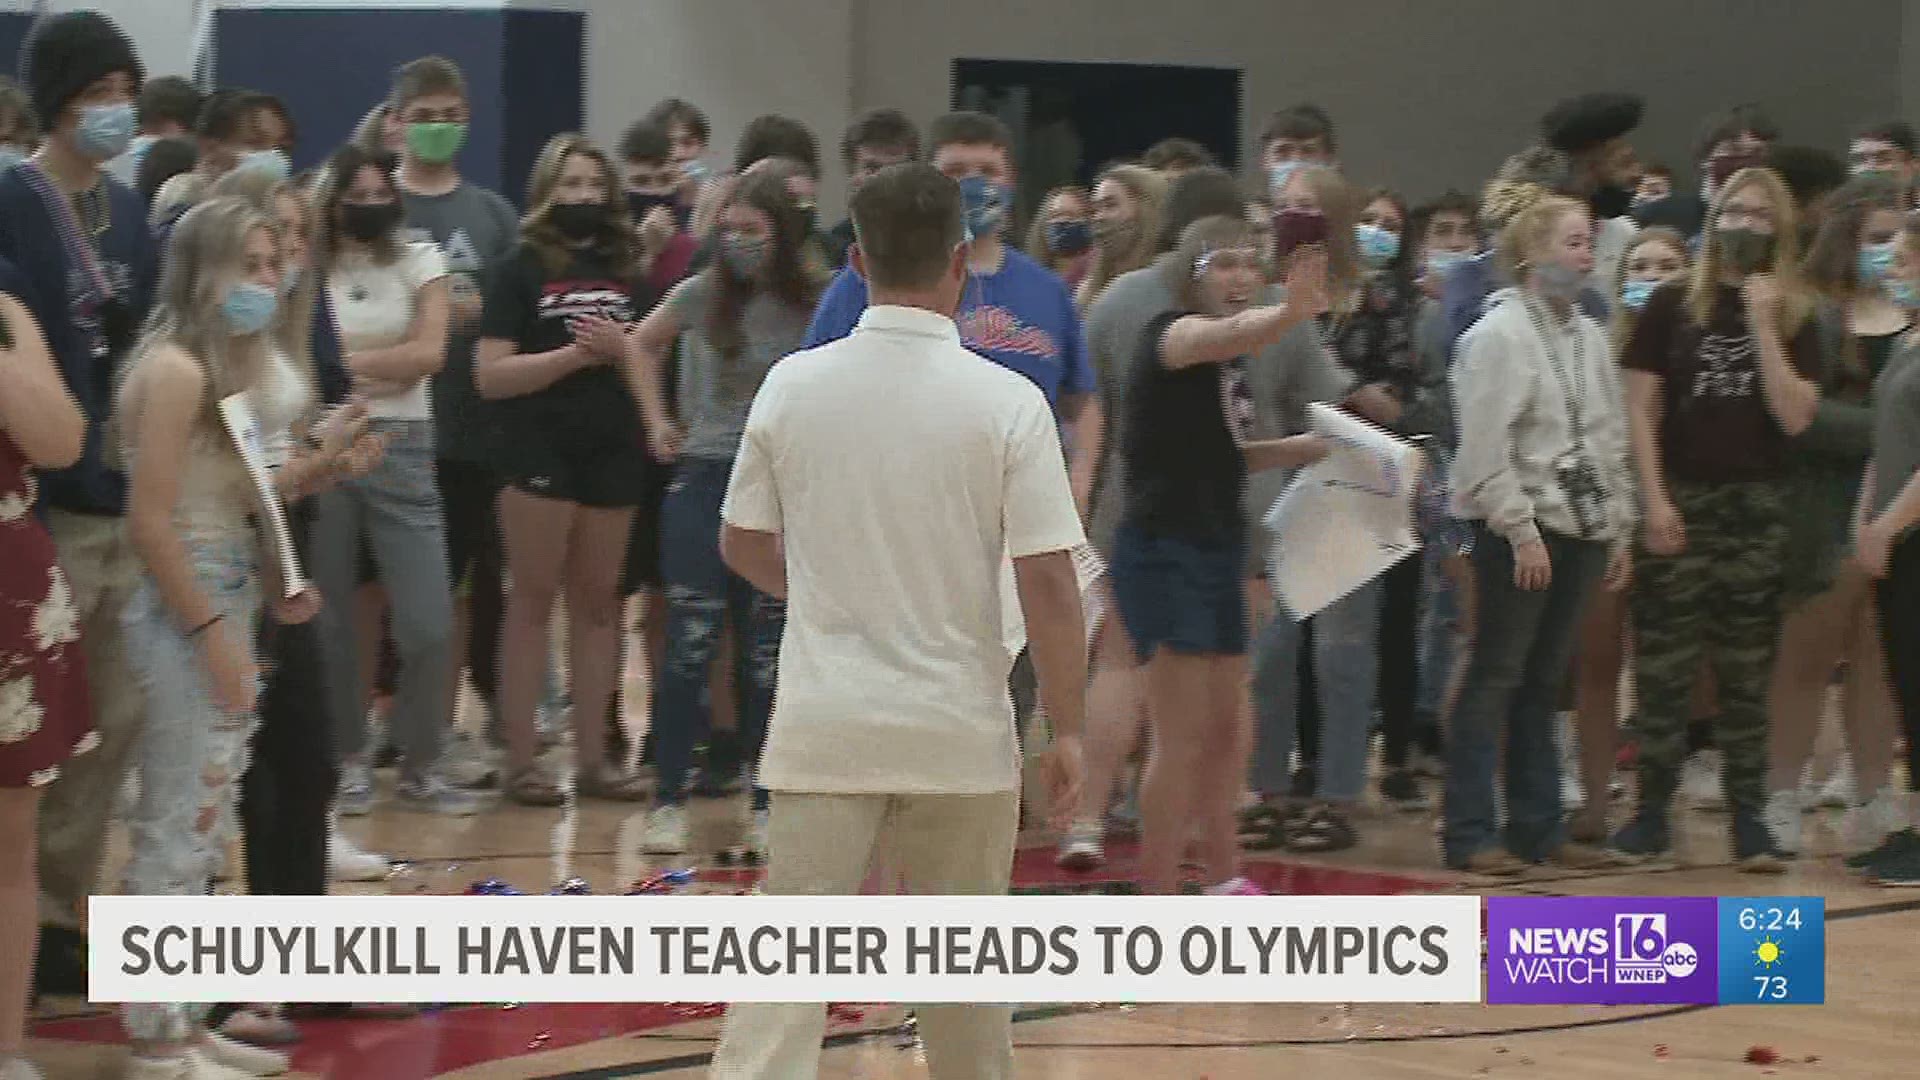 Schuylkill Haven teacher, Sammy Julian, heads to the Olympic Games in Tokyo to officiate wrestling